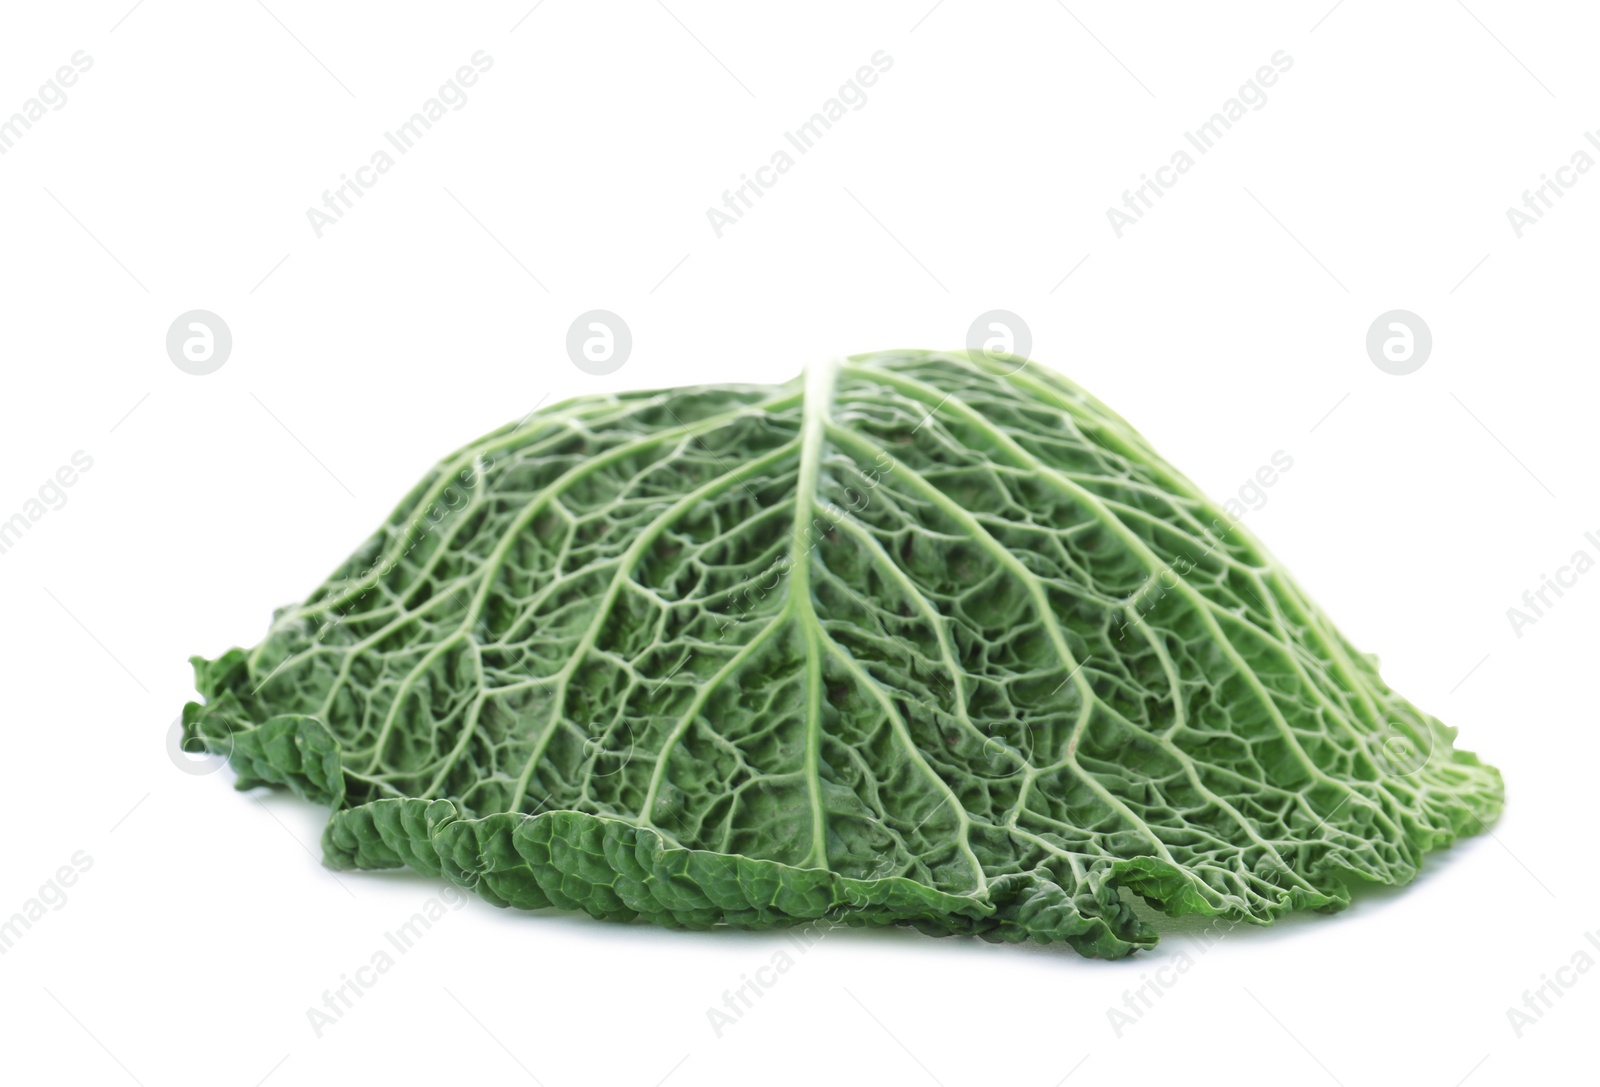 Photo of Green leaf of savoy cabbage on white background